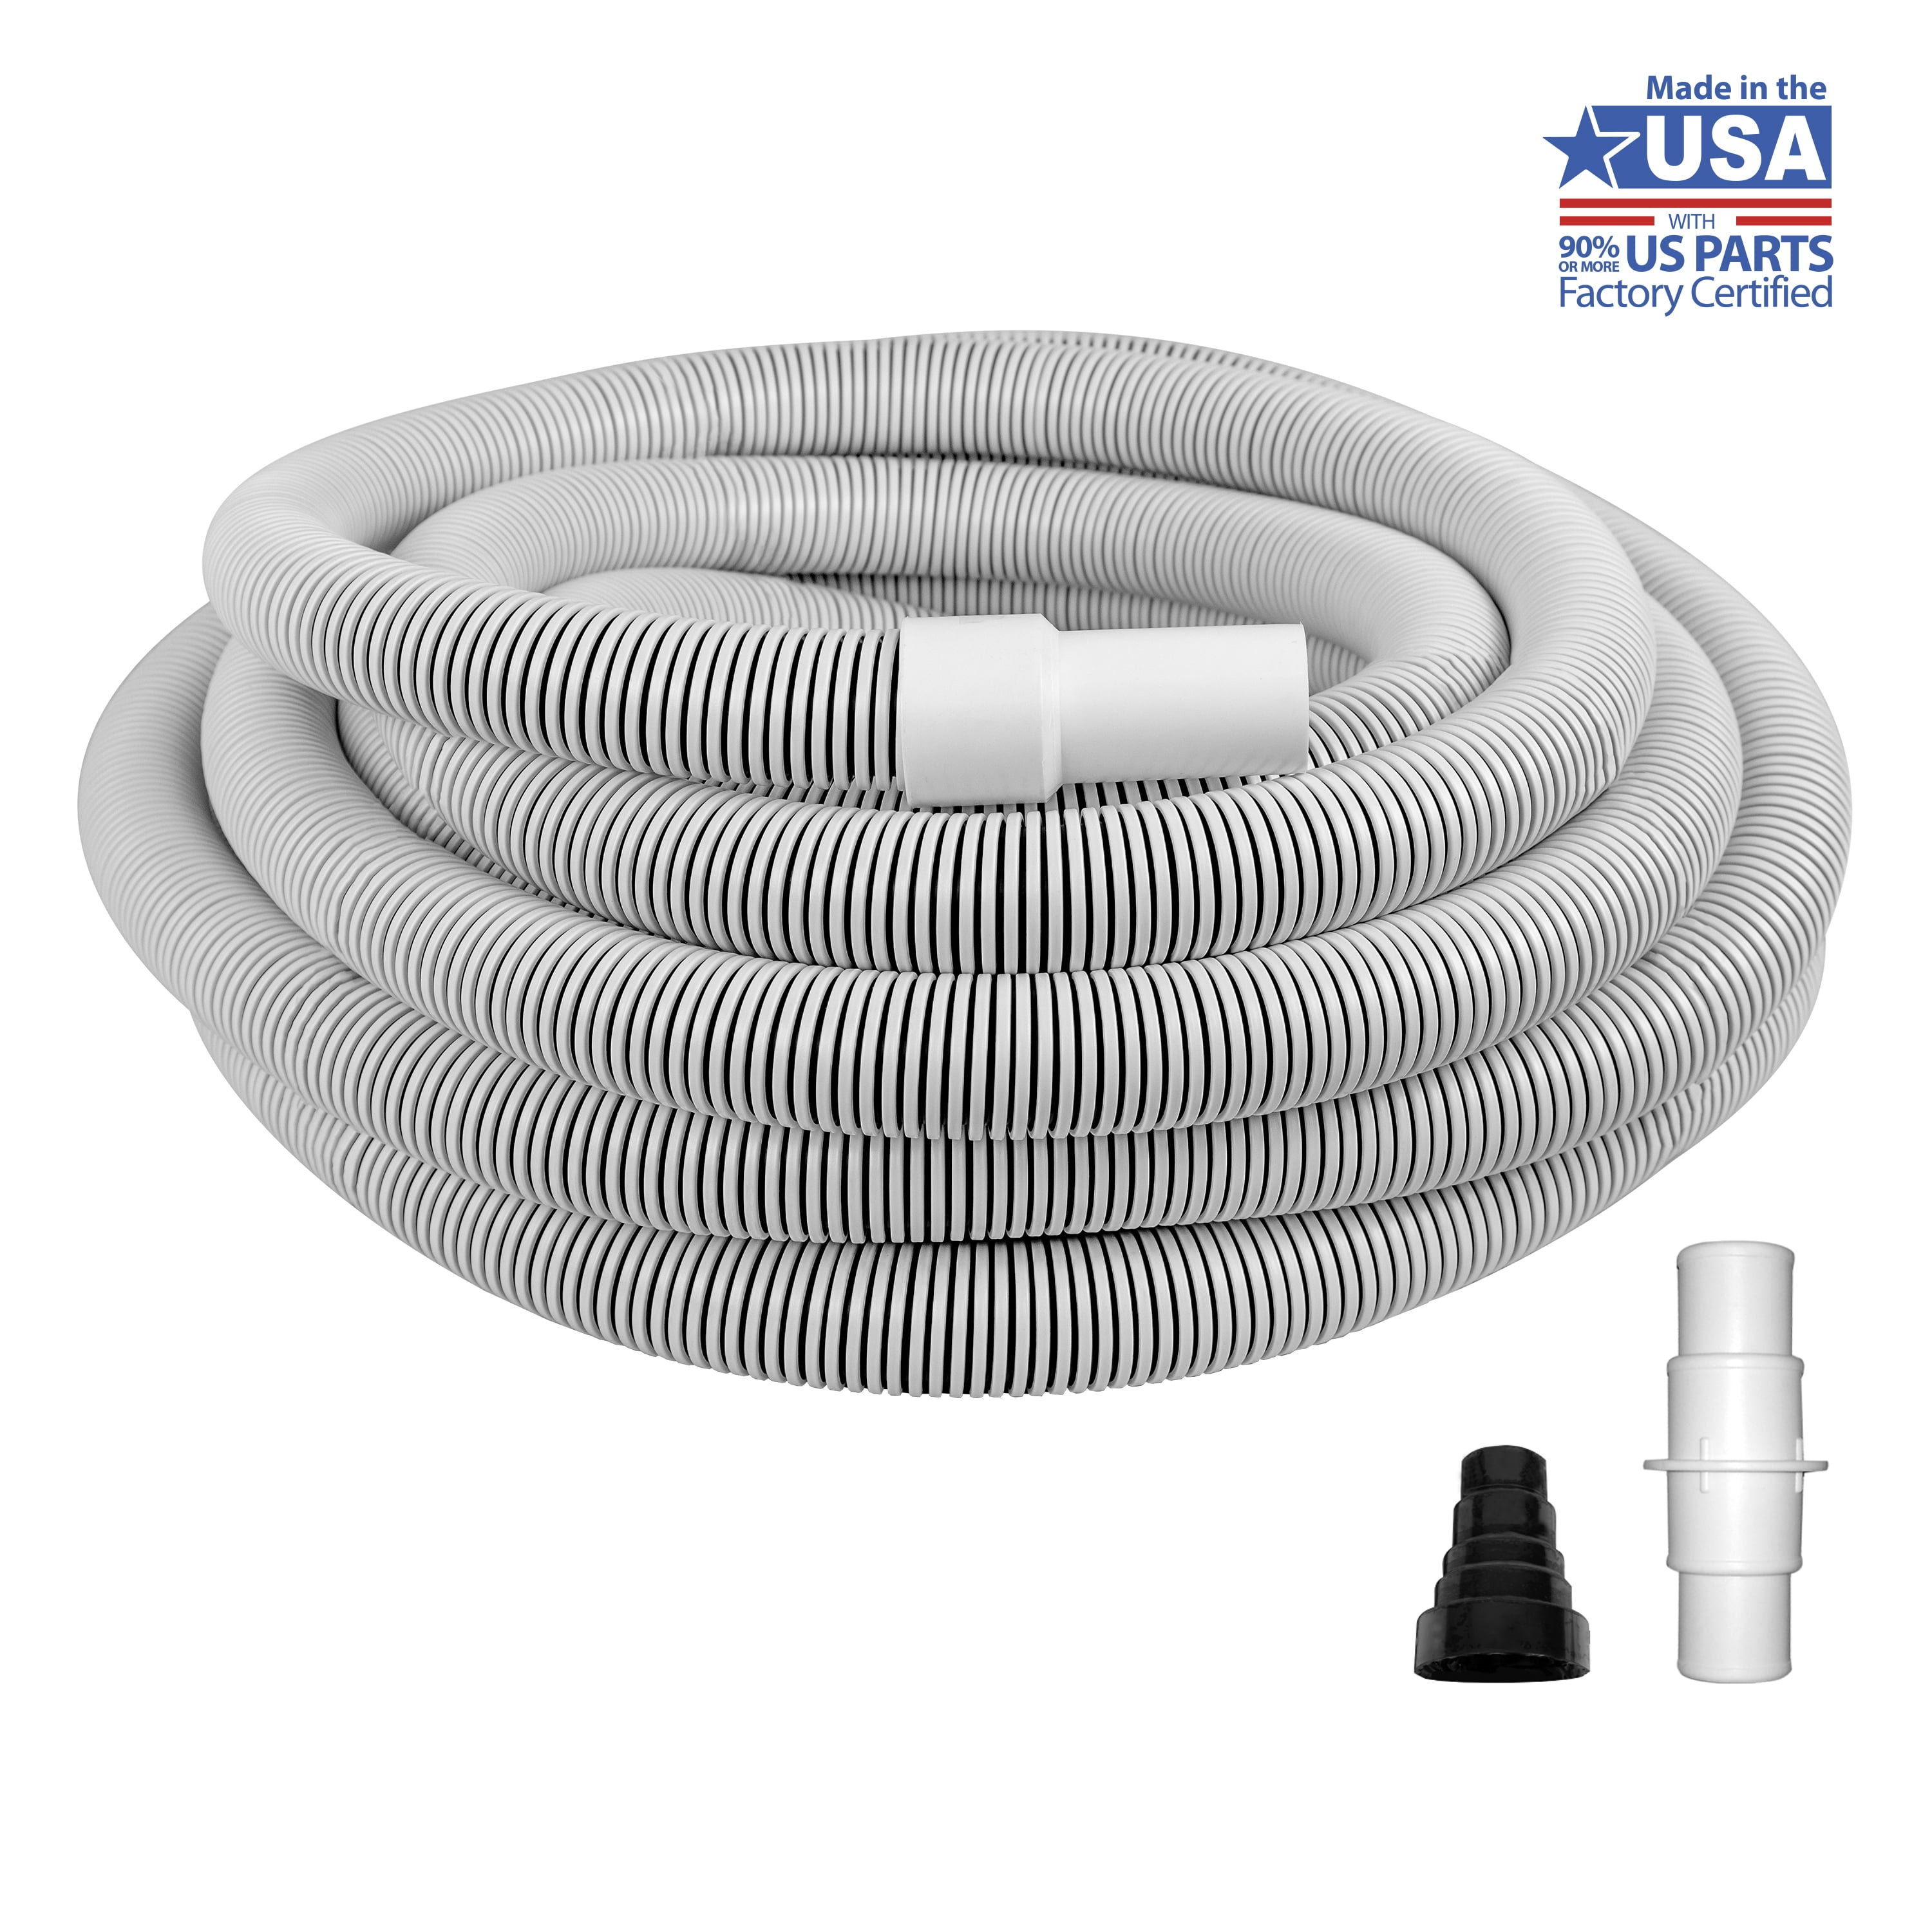 Mainstays 35' Swimming Pool and Spa Vacuum Hose with Adapter Set